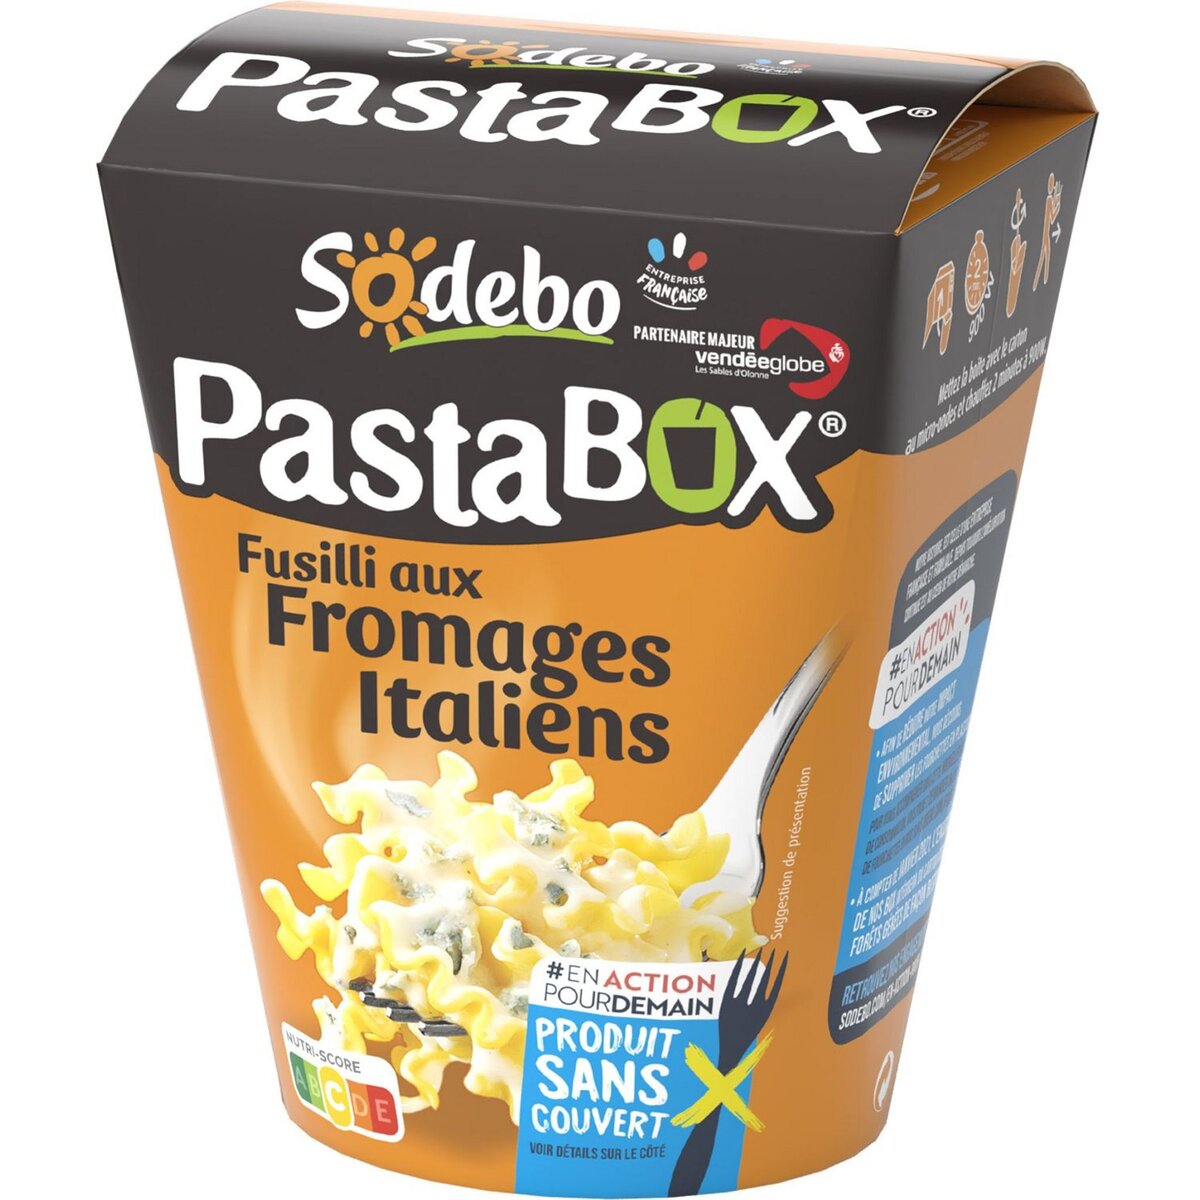 SODEBO Pastabox fusilli fromage italien sans couverts 1 portion 300g